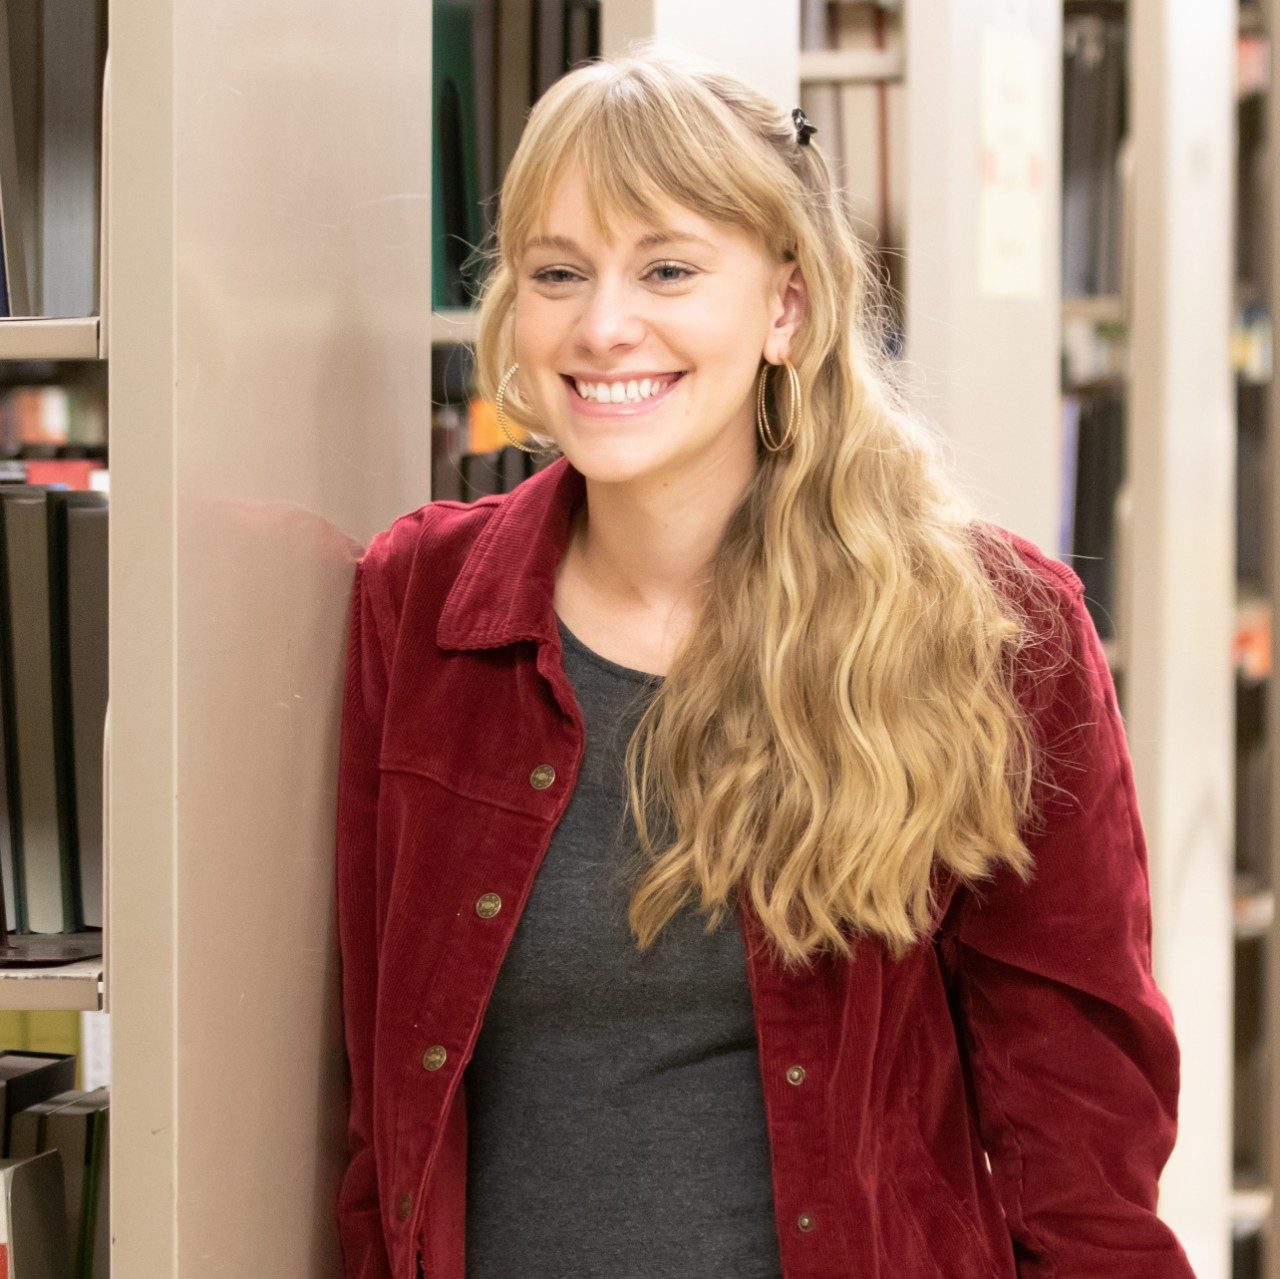 Rachel served as co-editor-in-chief of an undergraduate research journal and worked in the English Department. After graduating, Rachel began her career as a junior documentation specialist at Parsons Corporation. 